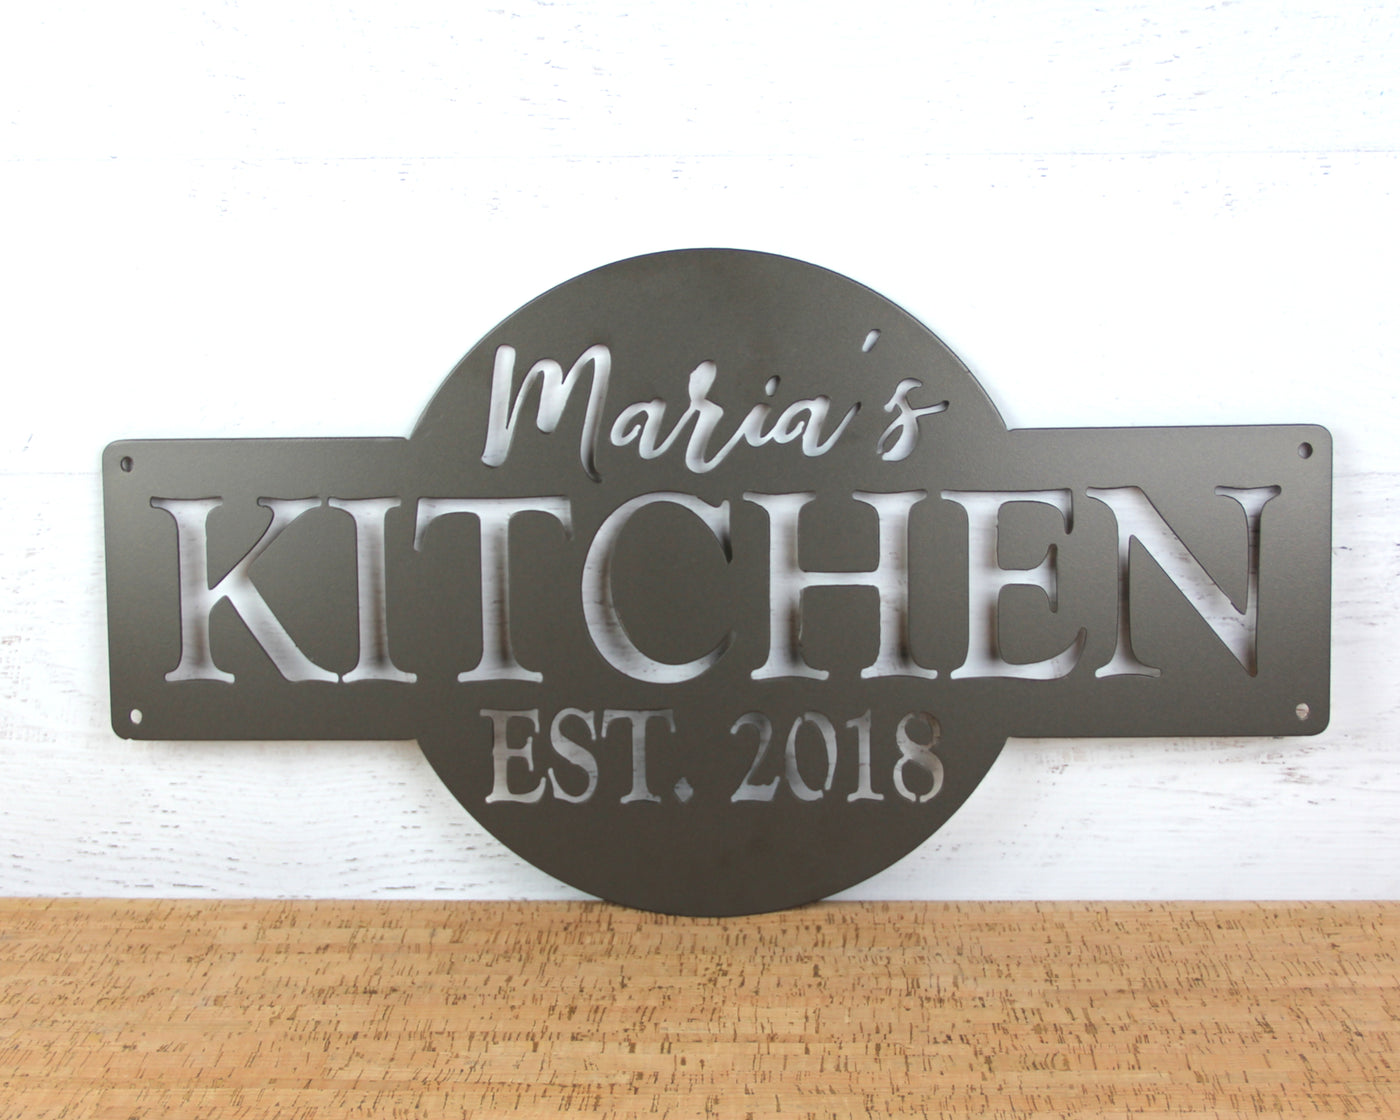 Personalized Kitchen Metal Sign with Name and EST. Date - Madison Iron and Wood - Personalized sign - metal outdoor decor - Steel deocrations - american made products - veteran owned business products - fencing decorations - fencing supplies - custom wall decorations - personalized wall signs - steel - decorative post caps - steel post caps - metal post caps - brackets - structural brackets - home improvement - easter - easter decorations - easter gift - easter yard decor